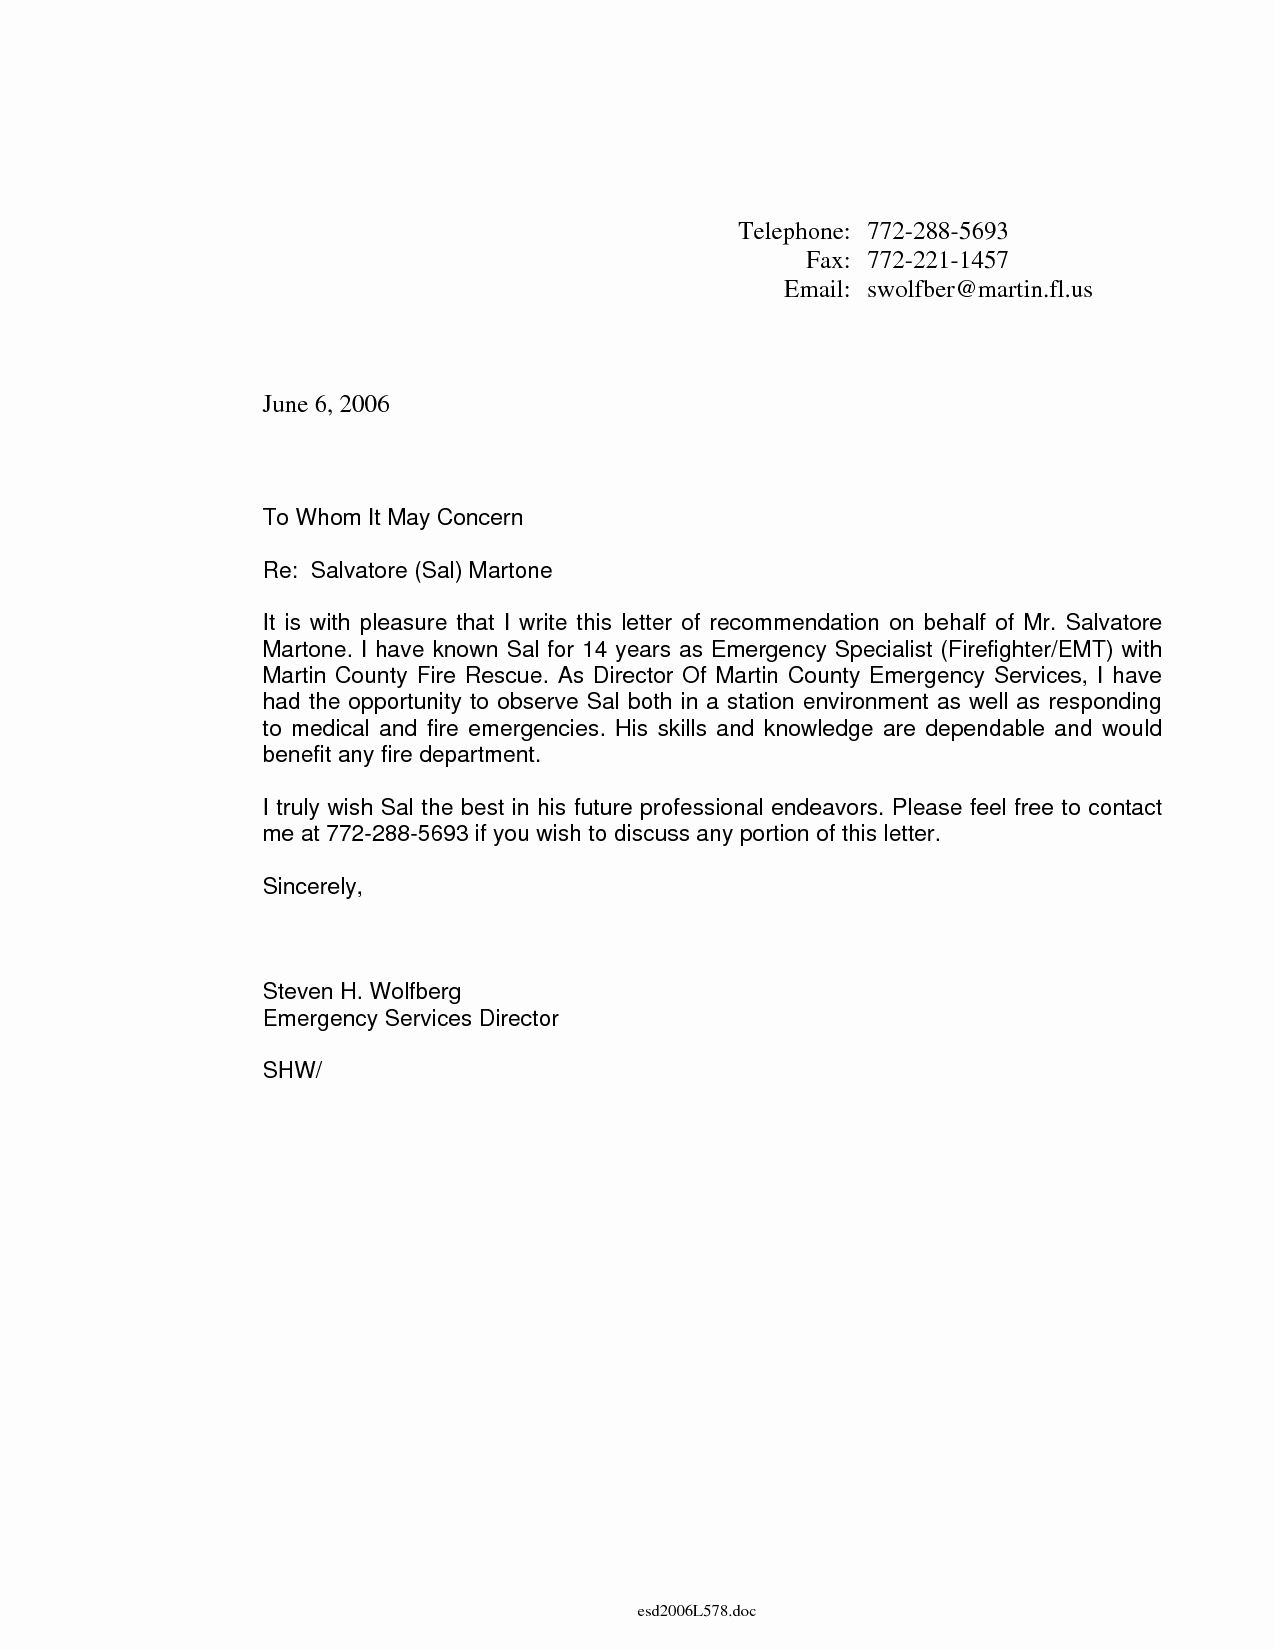 Firefighter Letter Of Recommendation Awesome Firefighter Letter Of Re Mendation